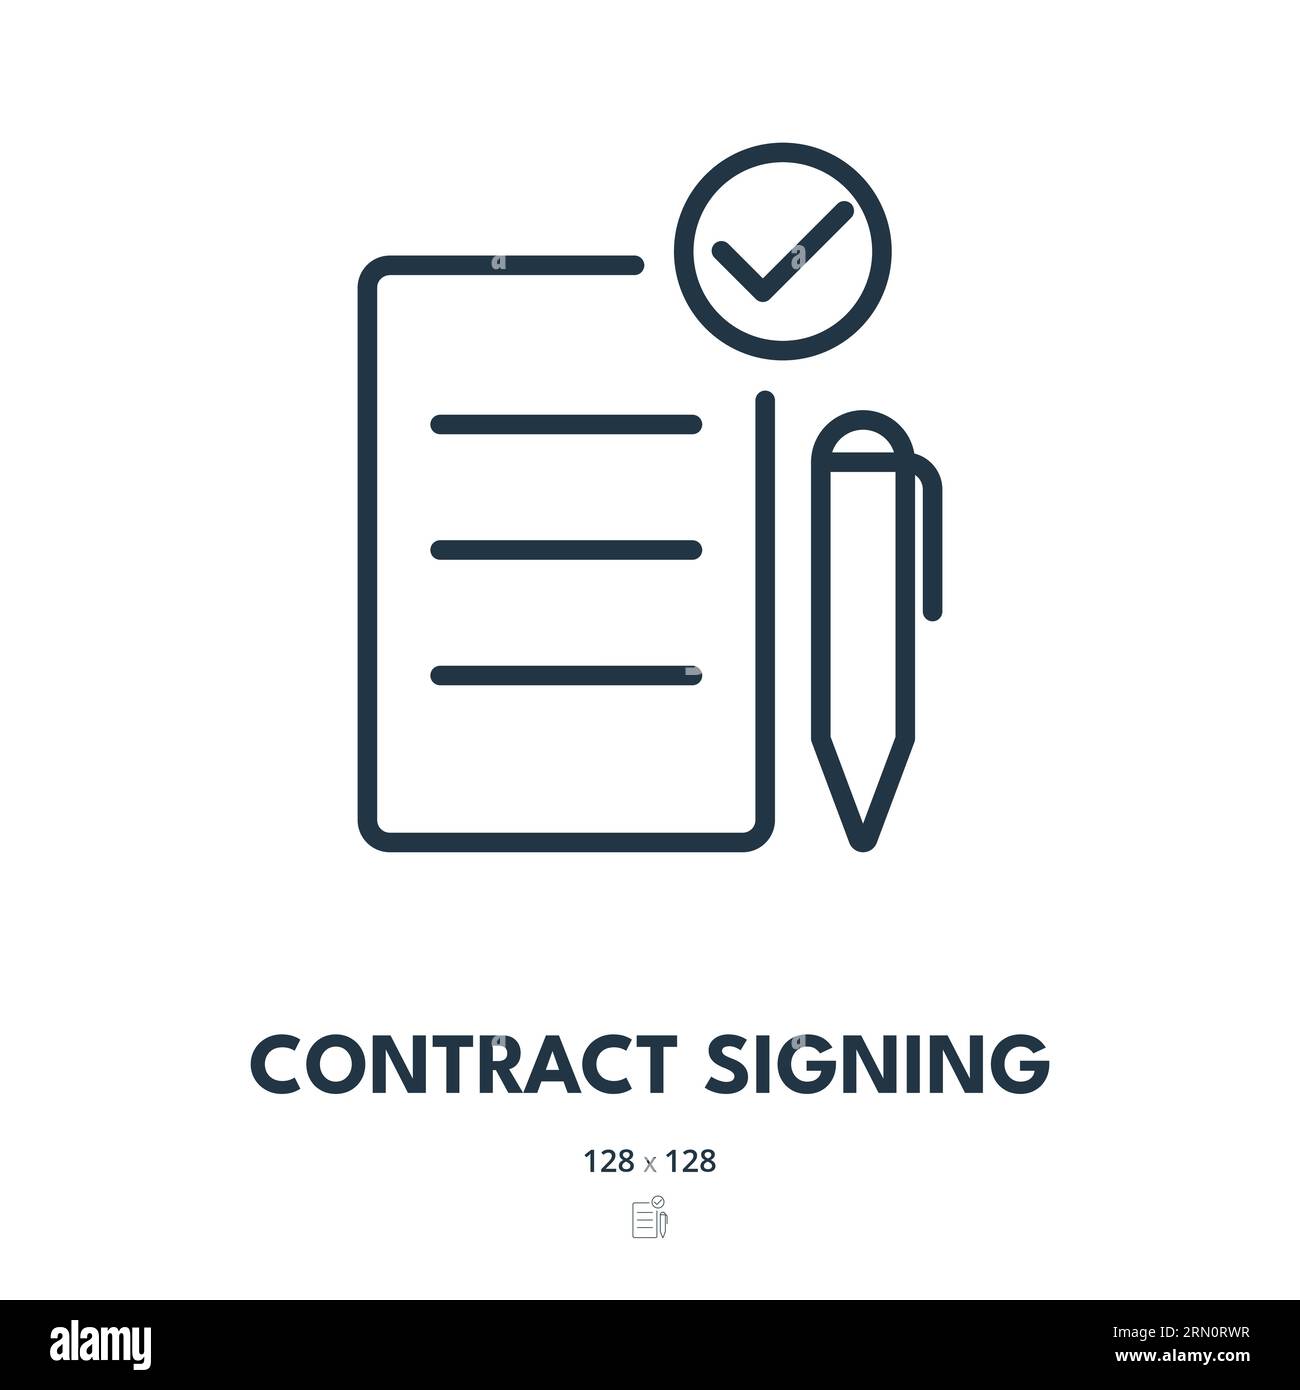 Contract Signing Icon. Document, Agreement, Signature. Editable Stroke. Simple Vector Icon Stock Vector